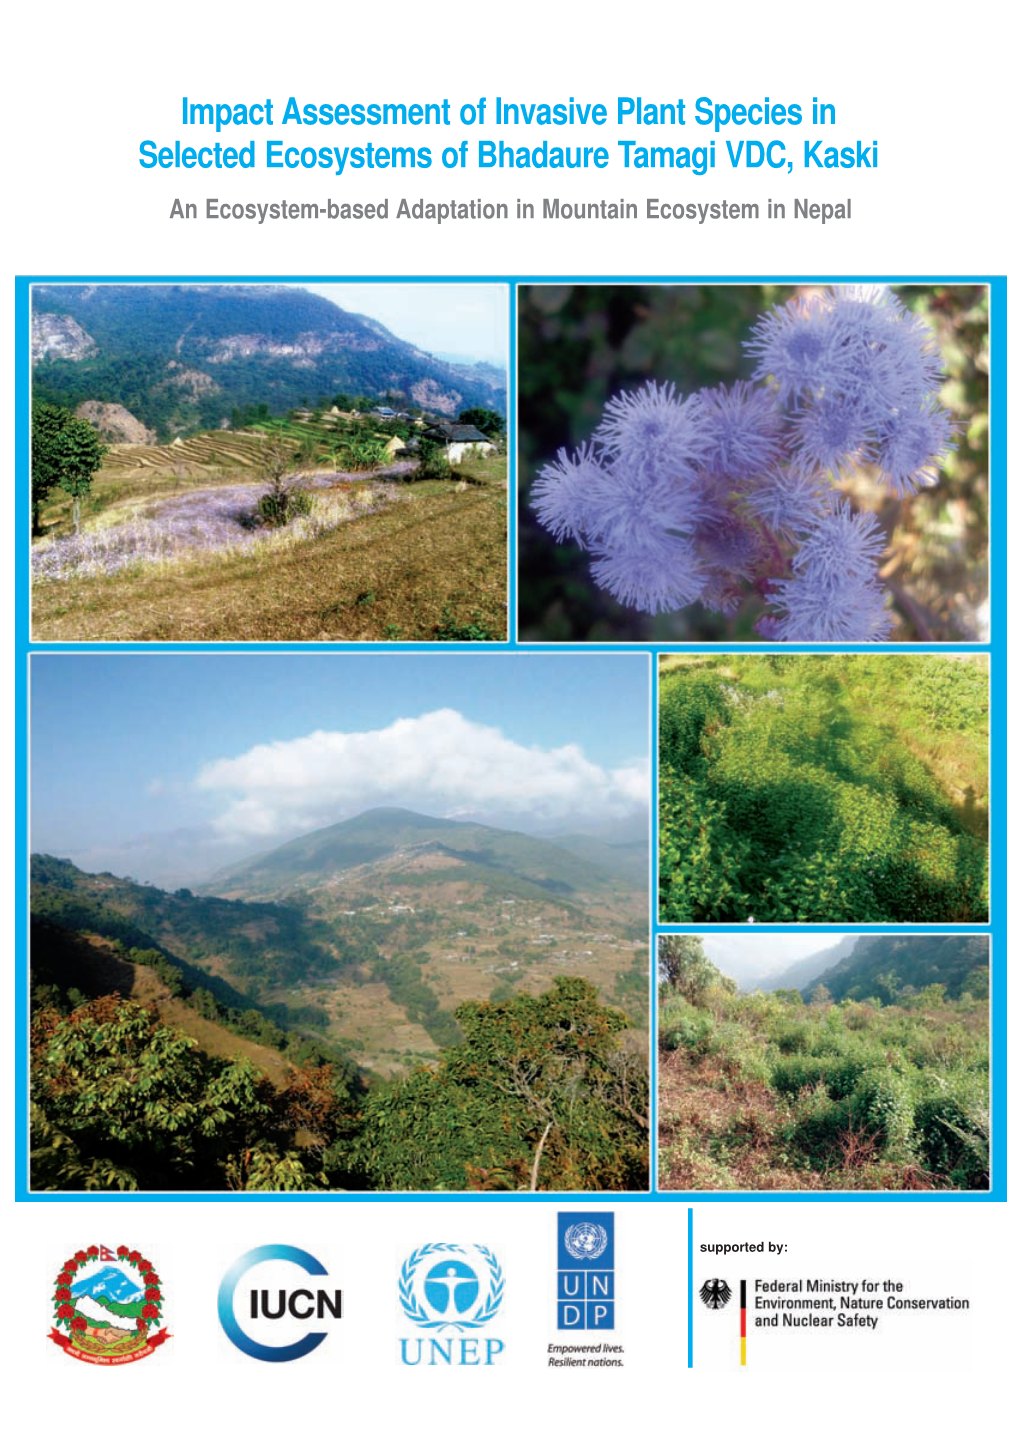 Impact Assessment of Invasive Plant Species in Selected Ecosystems of Bhadaure Tamagi VDC, Kaski an Ecosystem-Based Adaptation in Mountain Ecosystem in Nepal